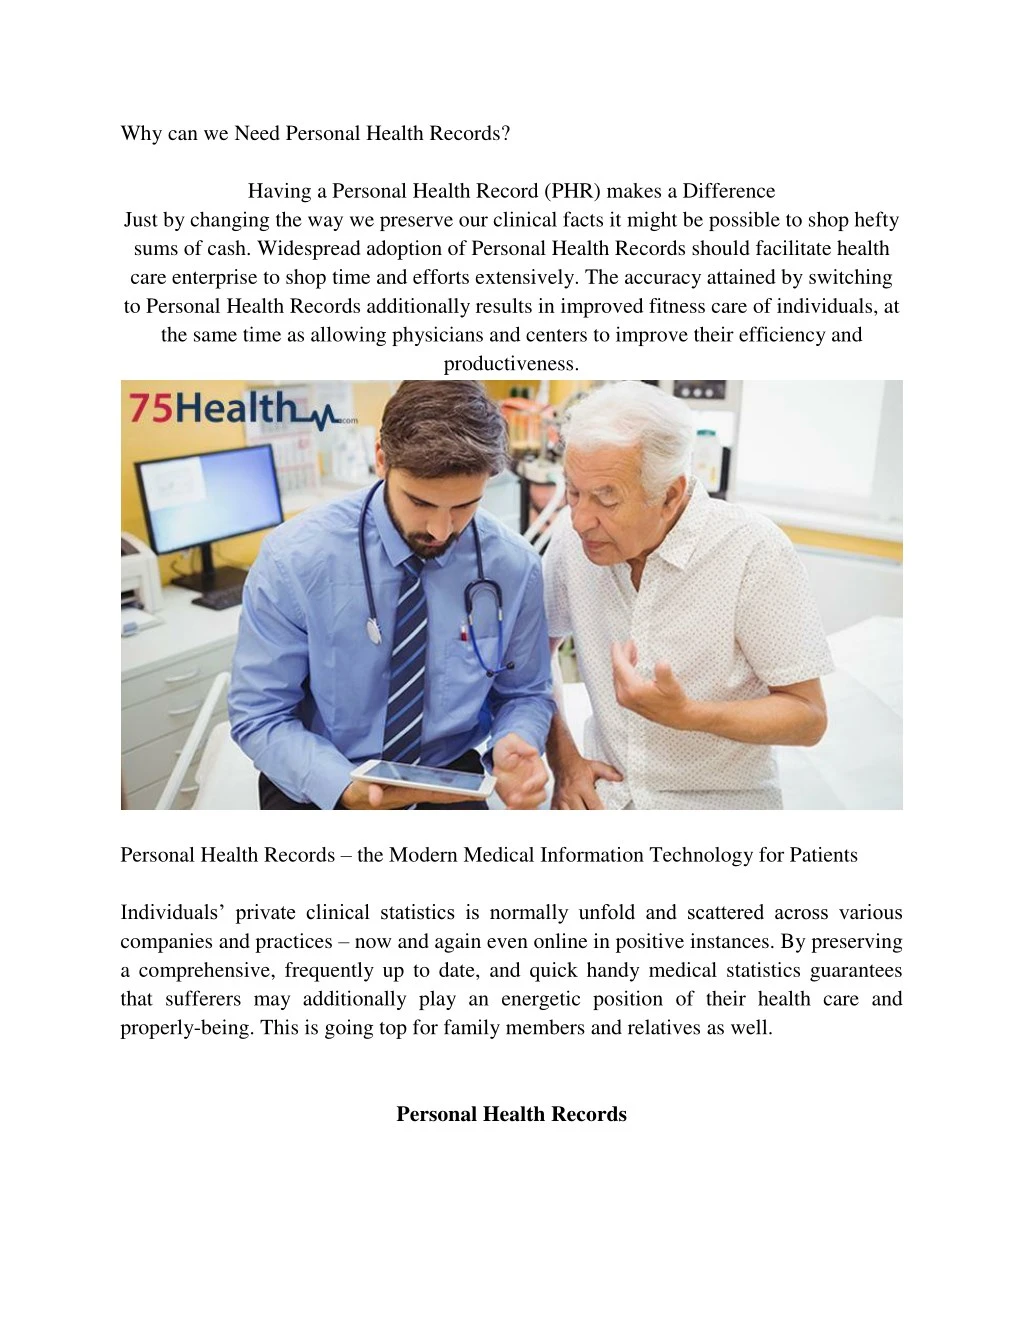 why can we need personal health records having